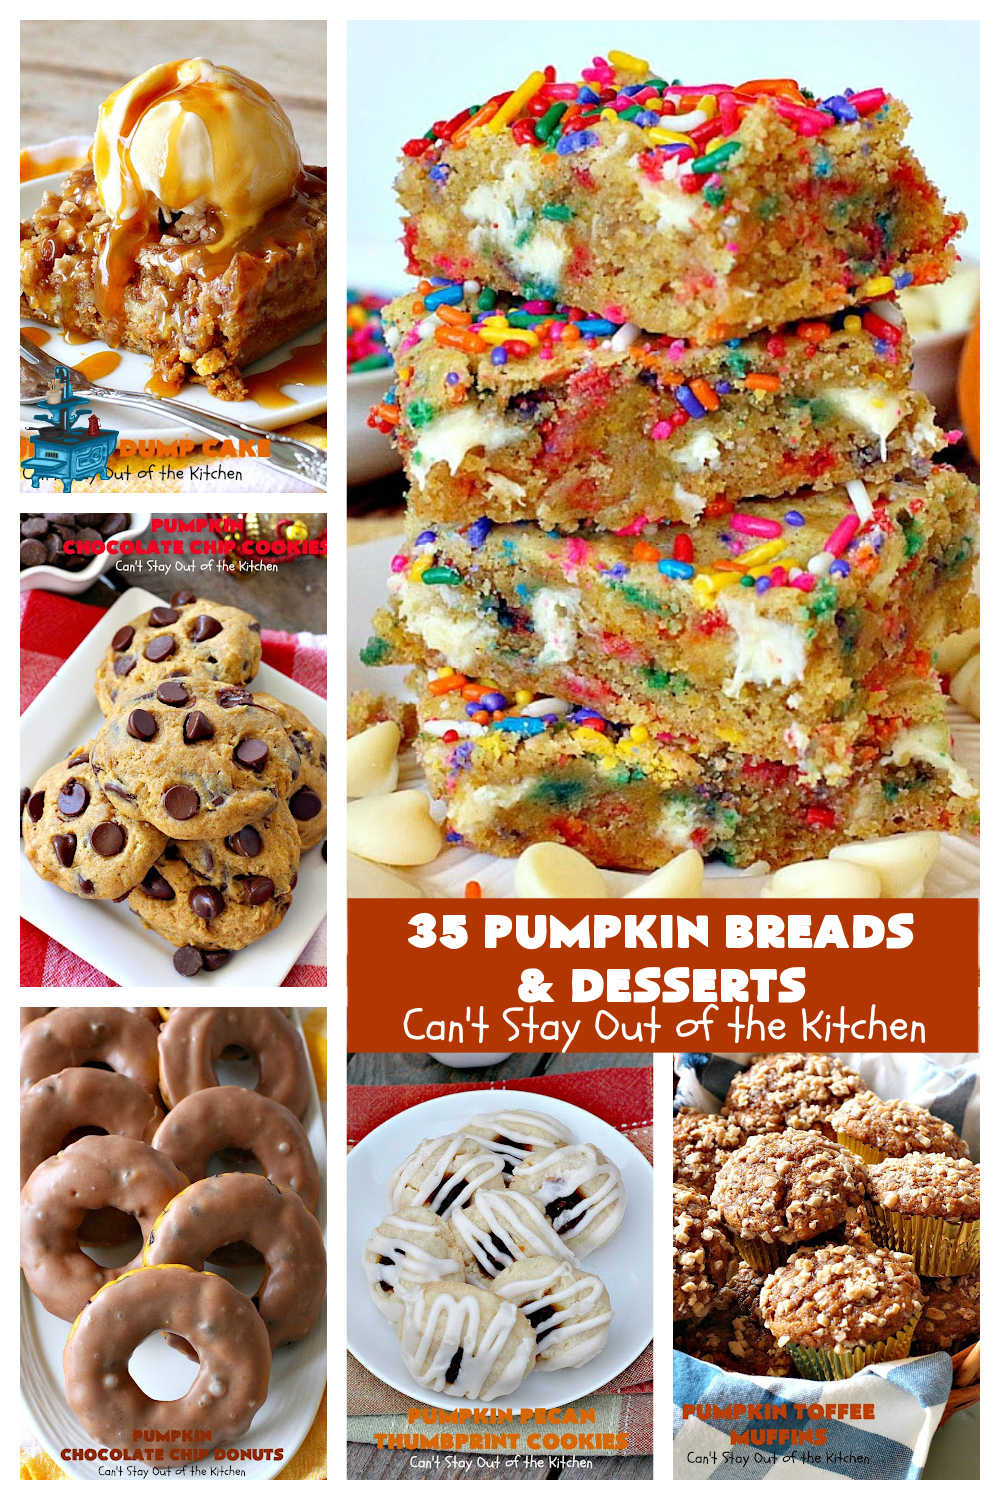 35 Pumpkin Breads & Desserts | Can't Stay Out of the Kitchen | Enjoy #holiday #baking with these fun & delicious #recipes including #breads, #muffins, #Croissants, #donuts, #cakes, #cookies, #blondies #pie, #biscuits & #PumpkinDesserts. #PumpkinBreadsAndDesserts #35PumpkinRecipes #PumpkinRecipes